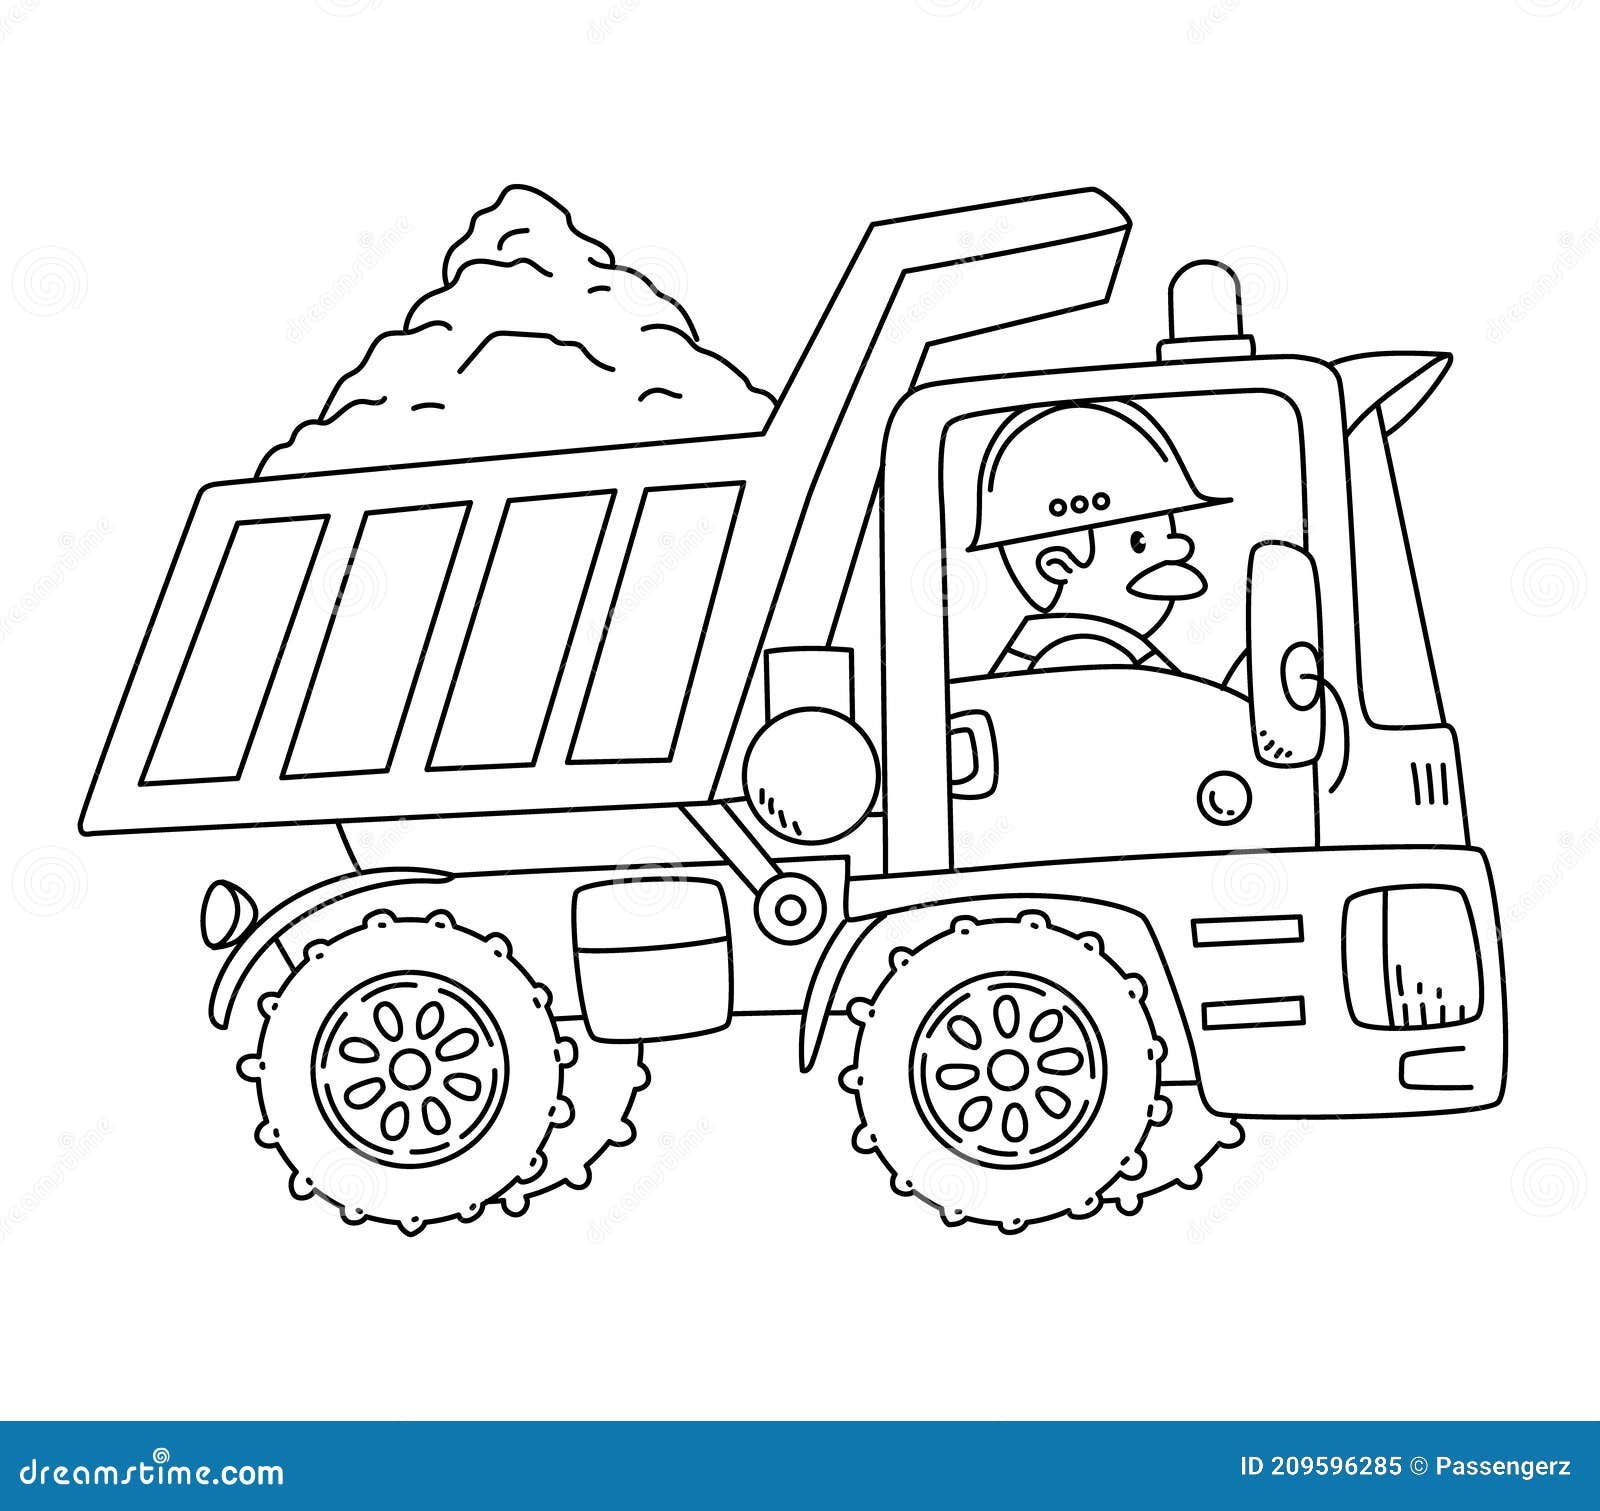 Construction worker in a dump truck coloring book stock vector